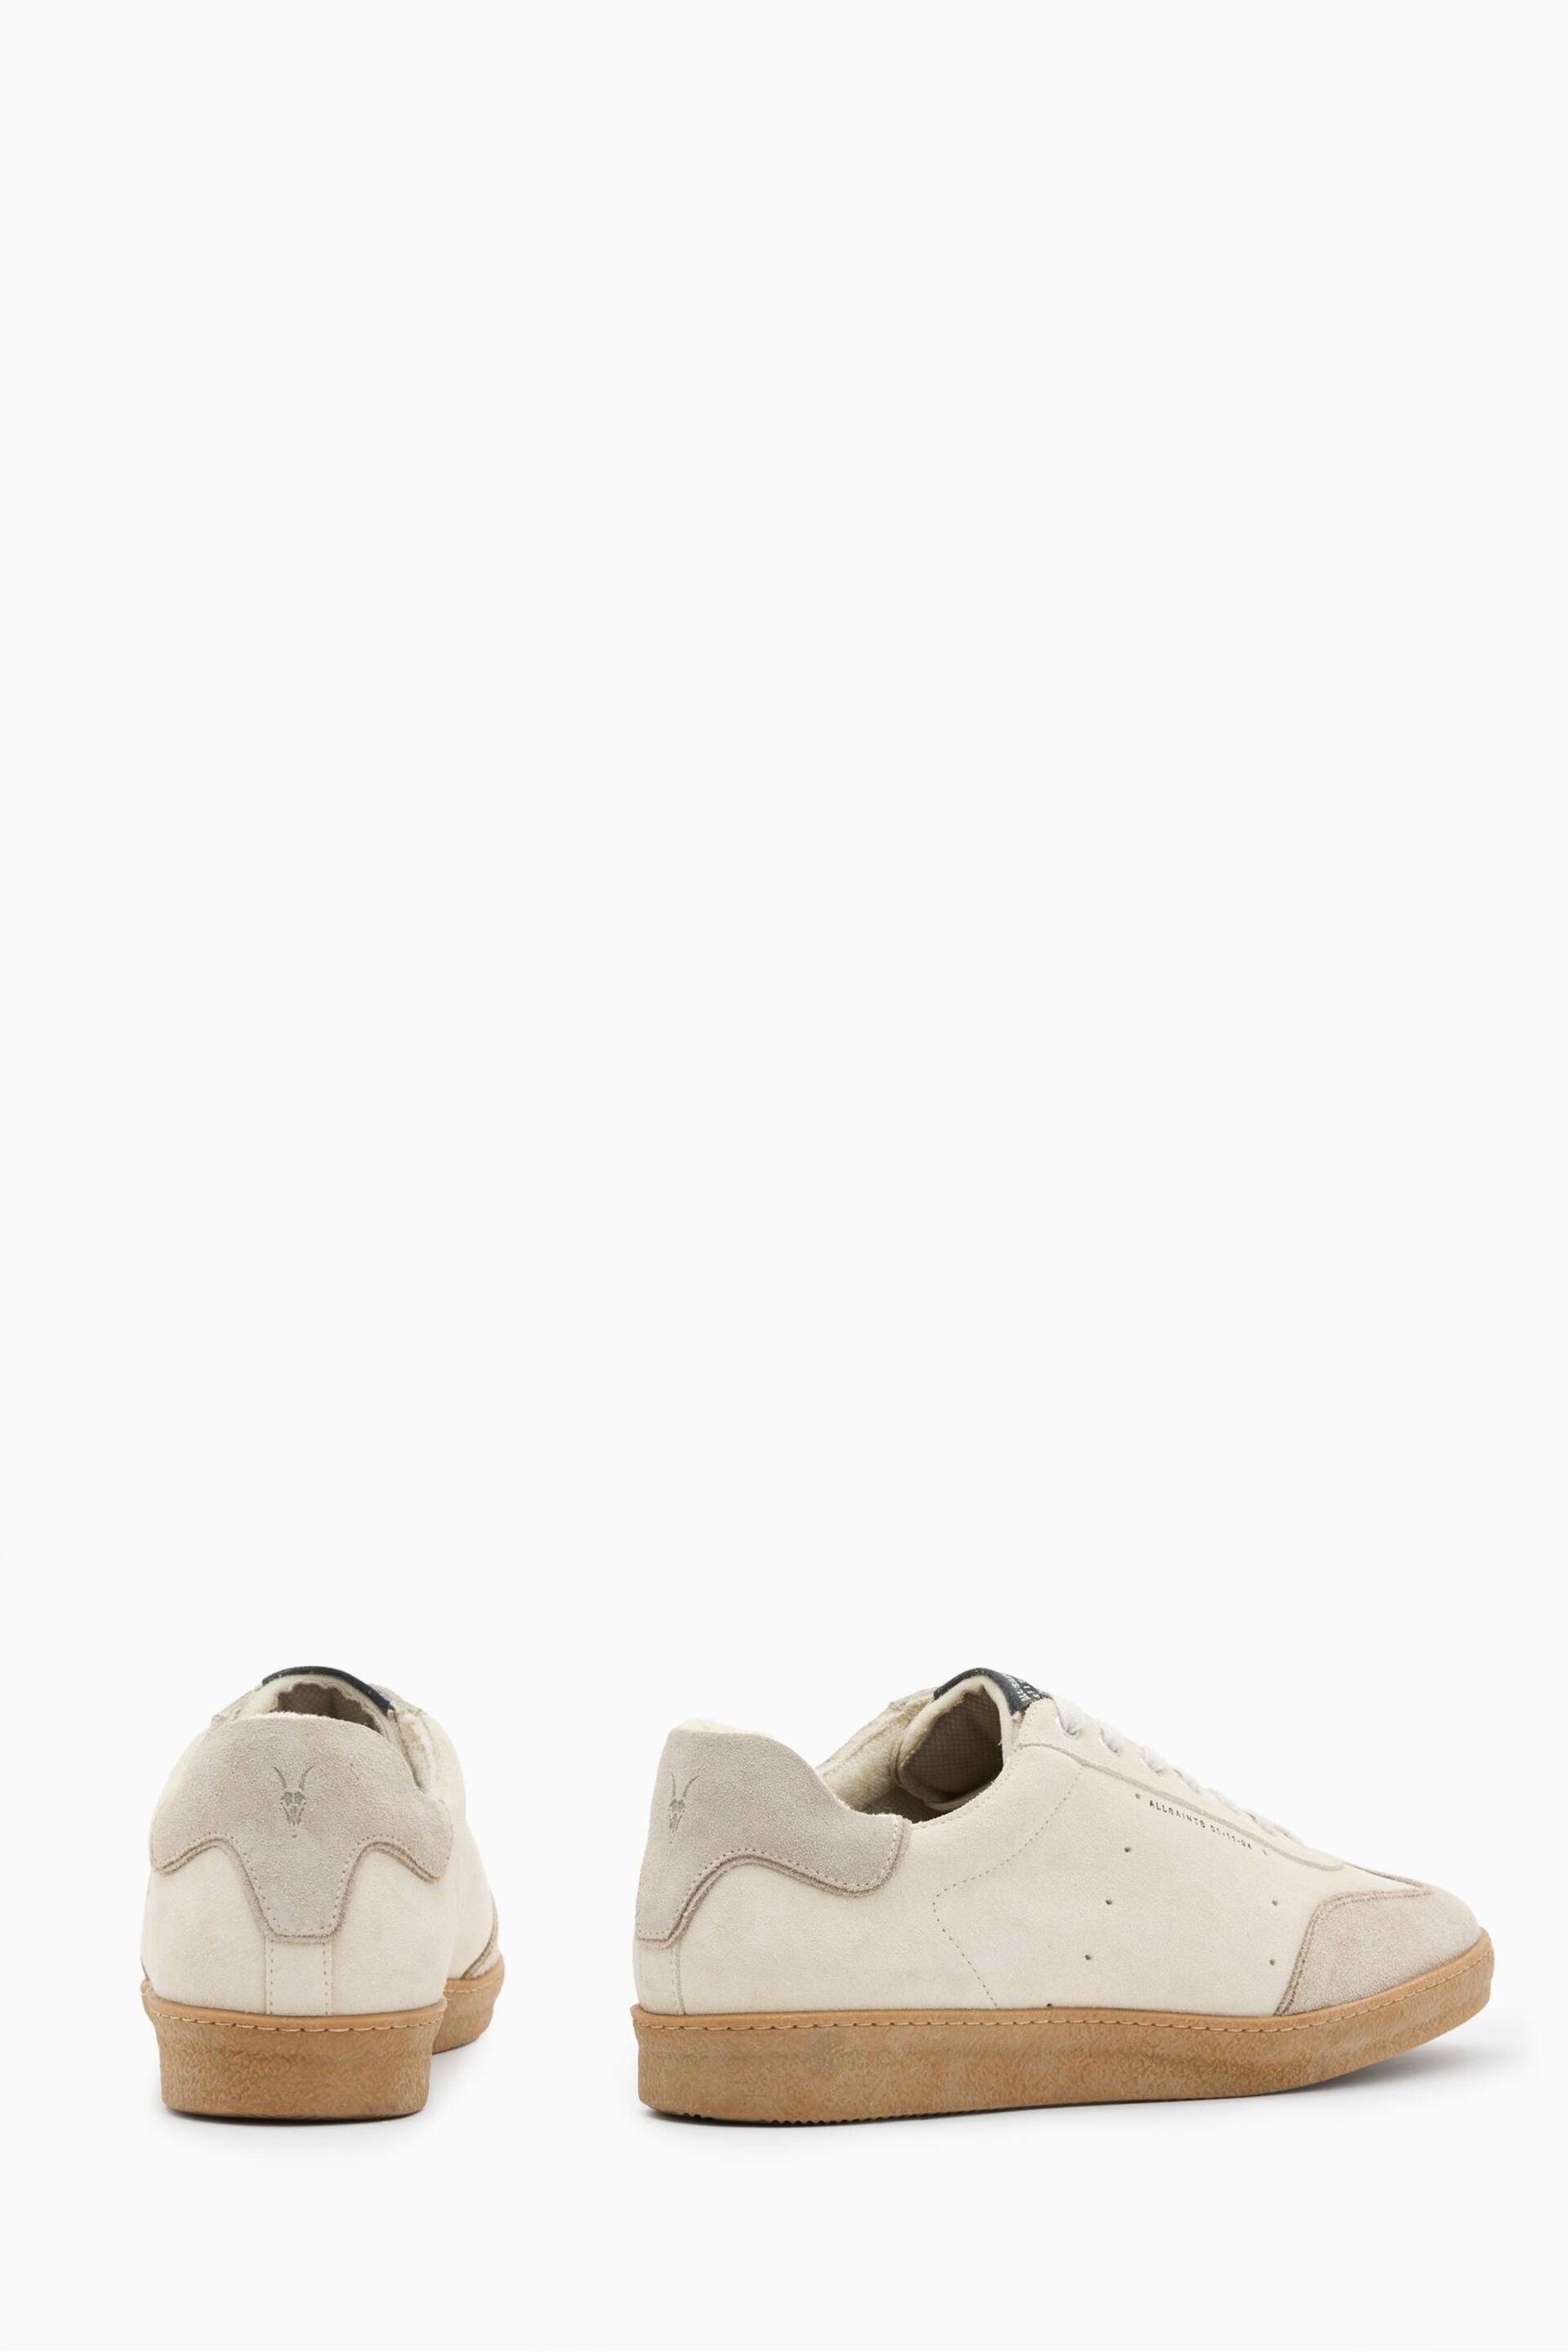 AllSaints White Leo Suede Low Shoes - Image 5 of 5